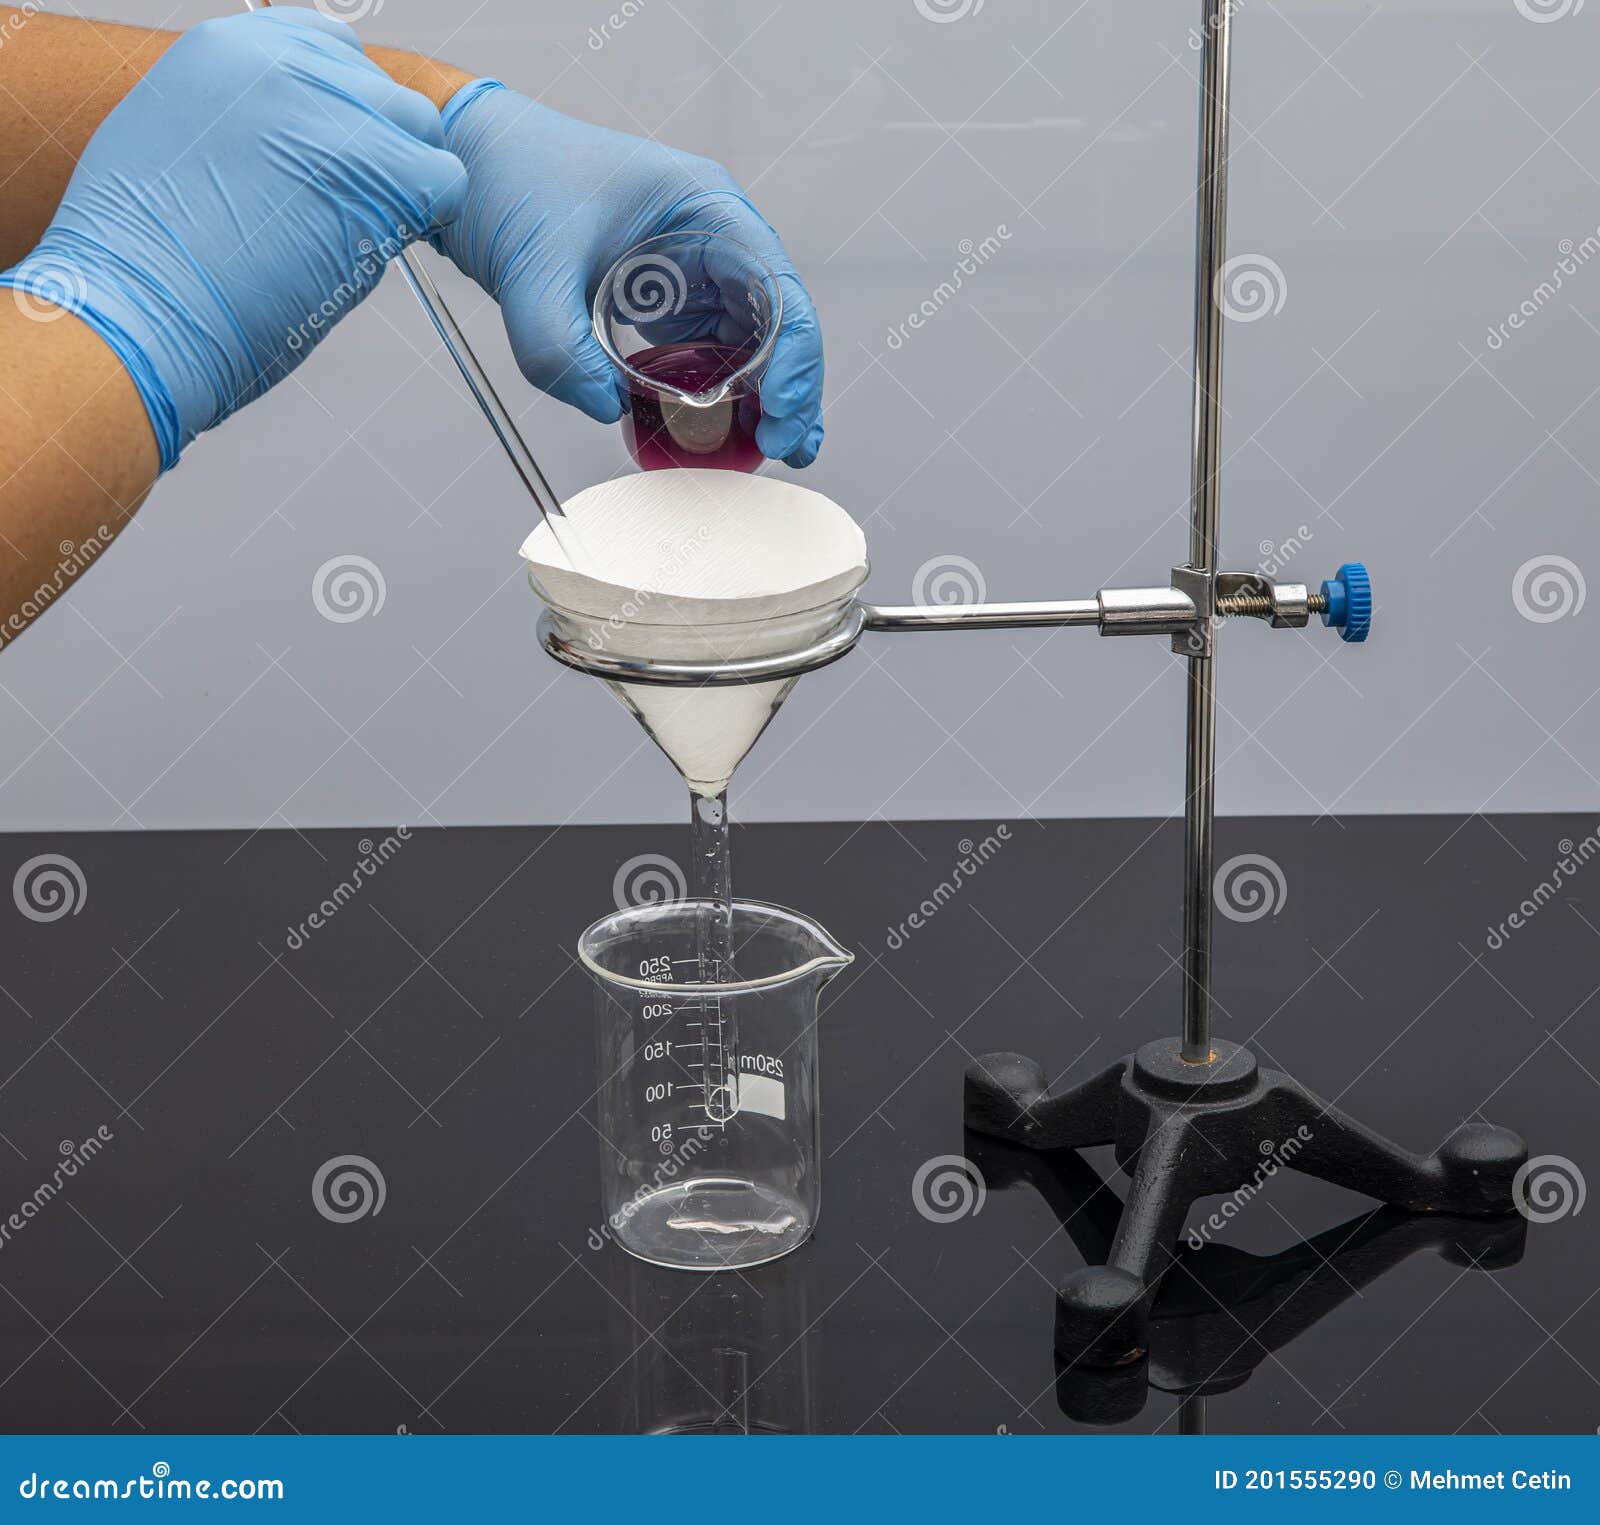 filter paper in laboratory. scientists are chemical filtration by filtering through filter paper in a glass funnel, close up. phar